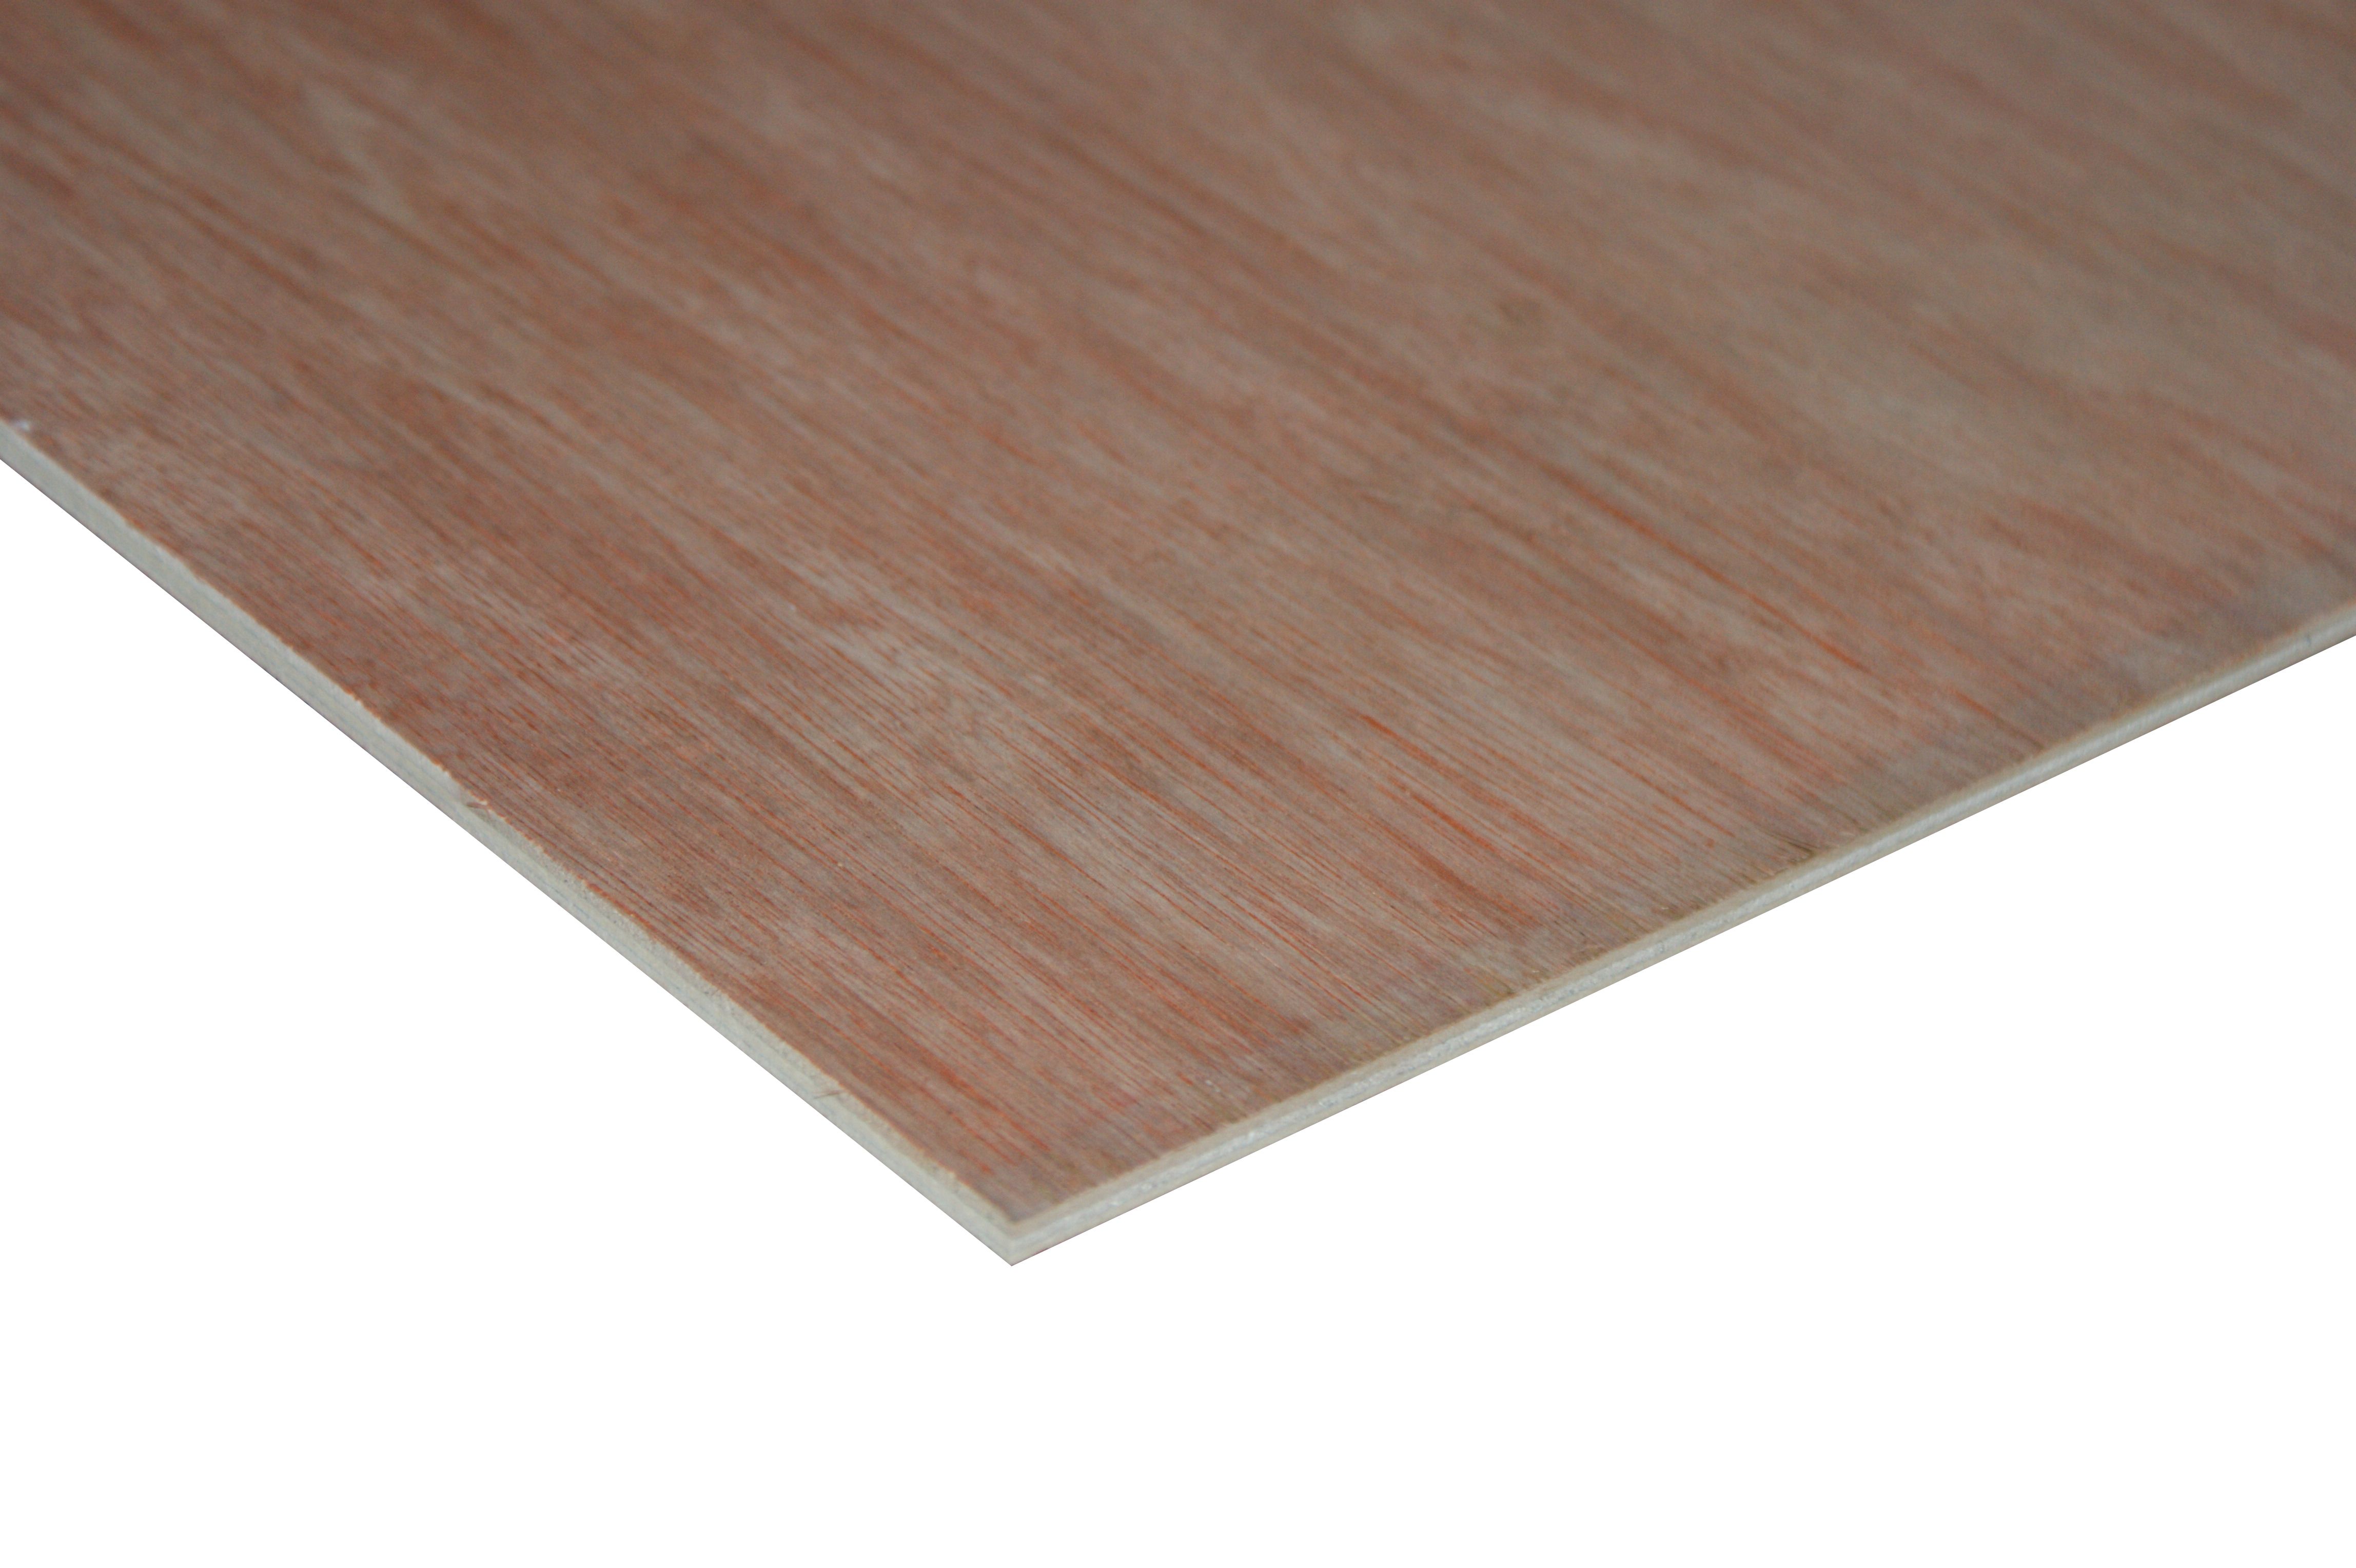 Image of Wickes Non-Structural Hardwood Plywood - 5.5 x 1220 x 2440mm